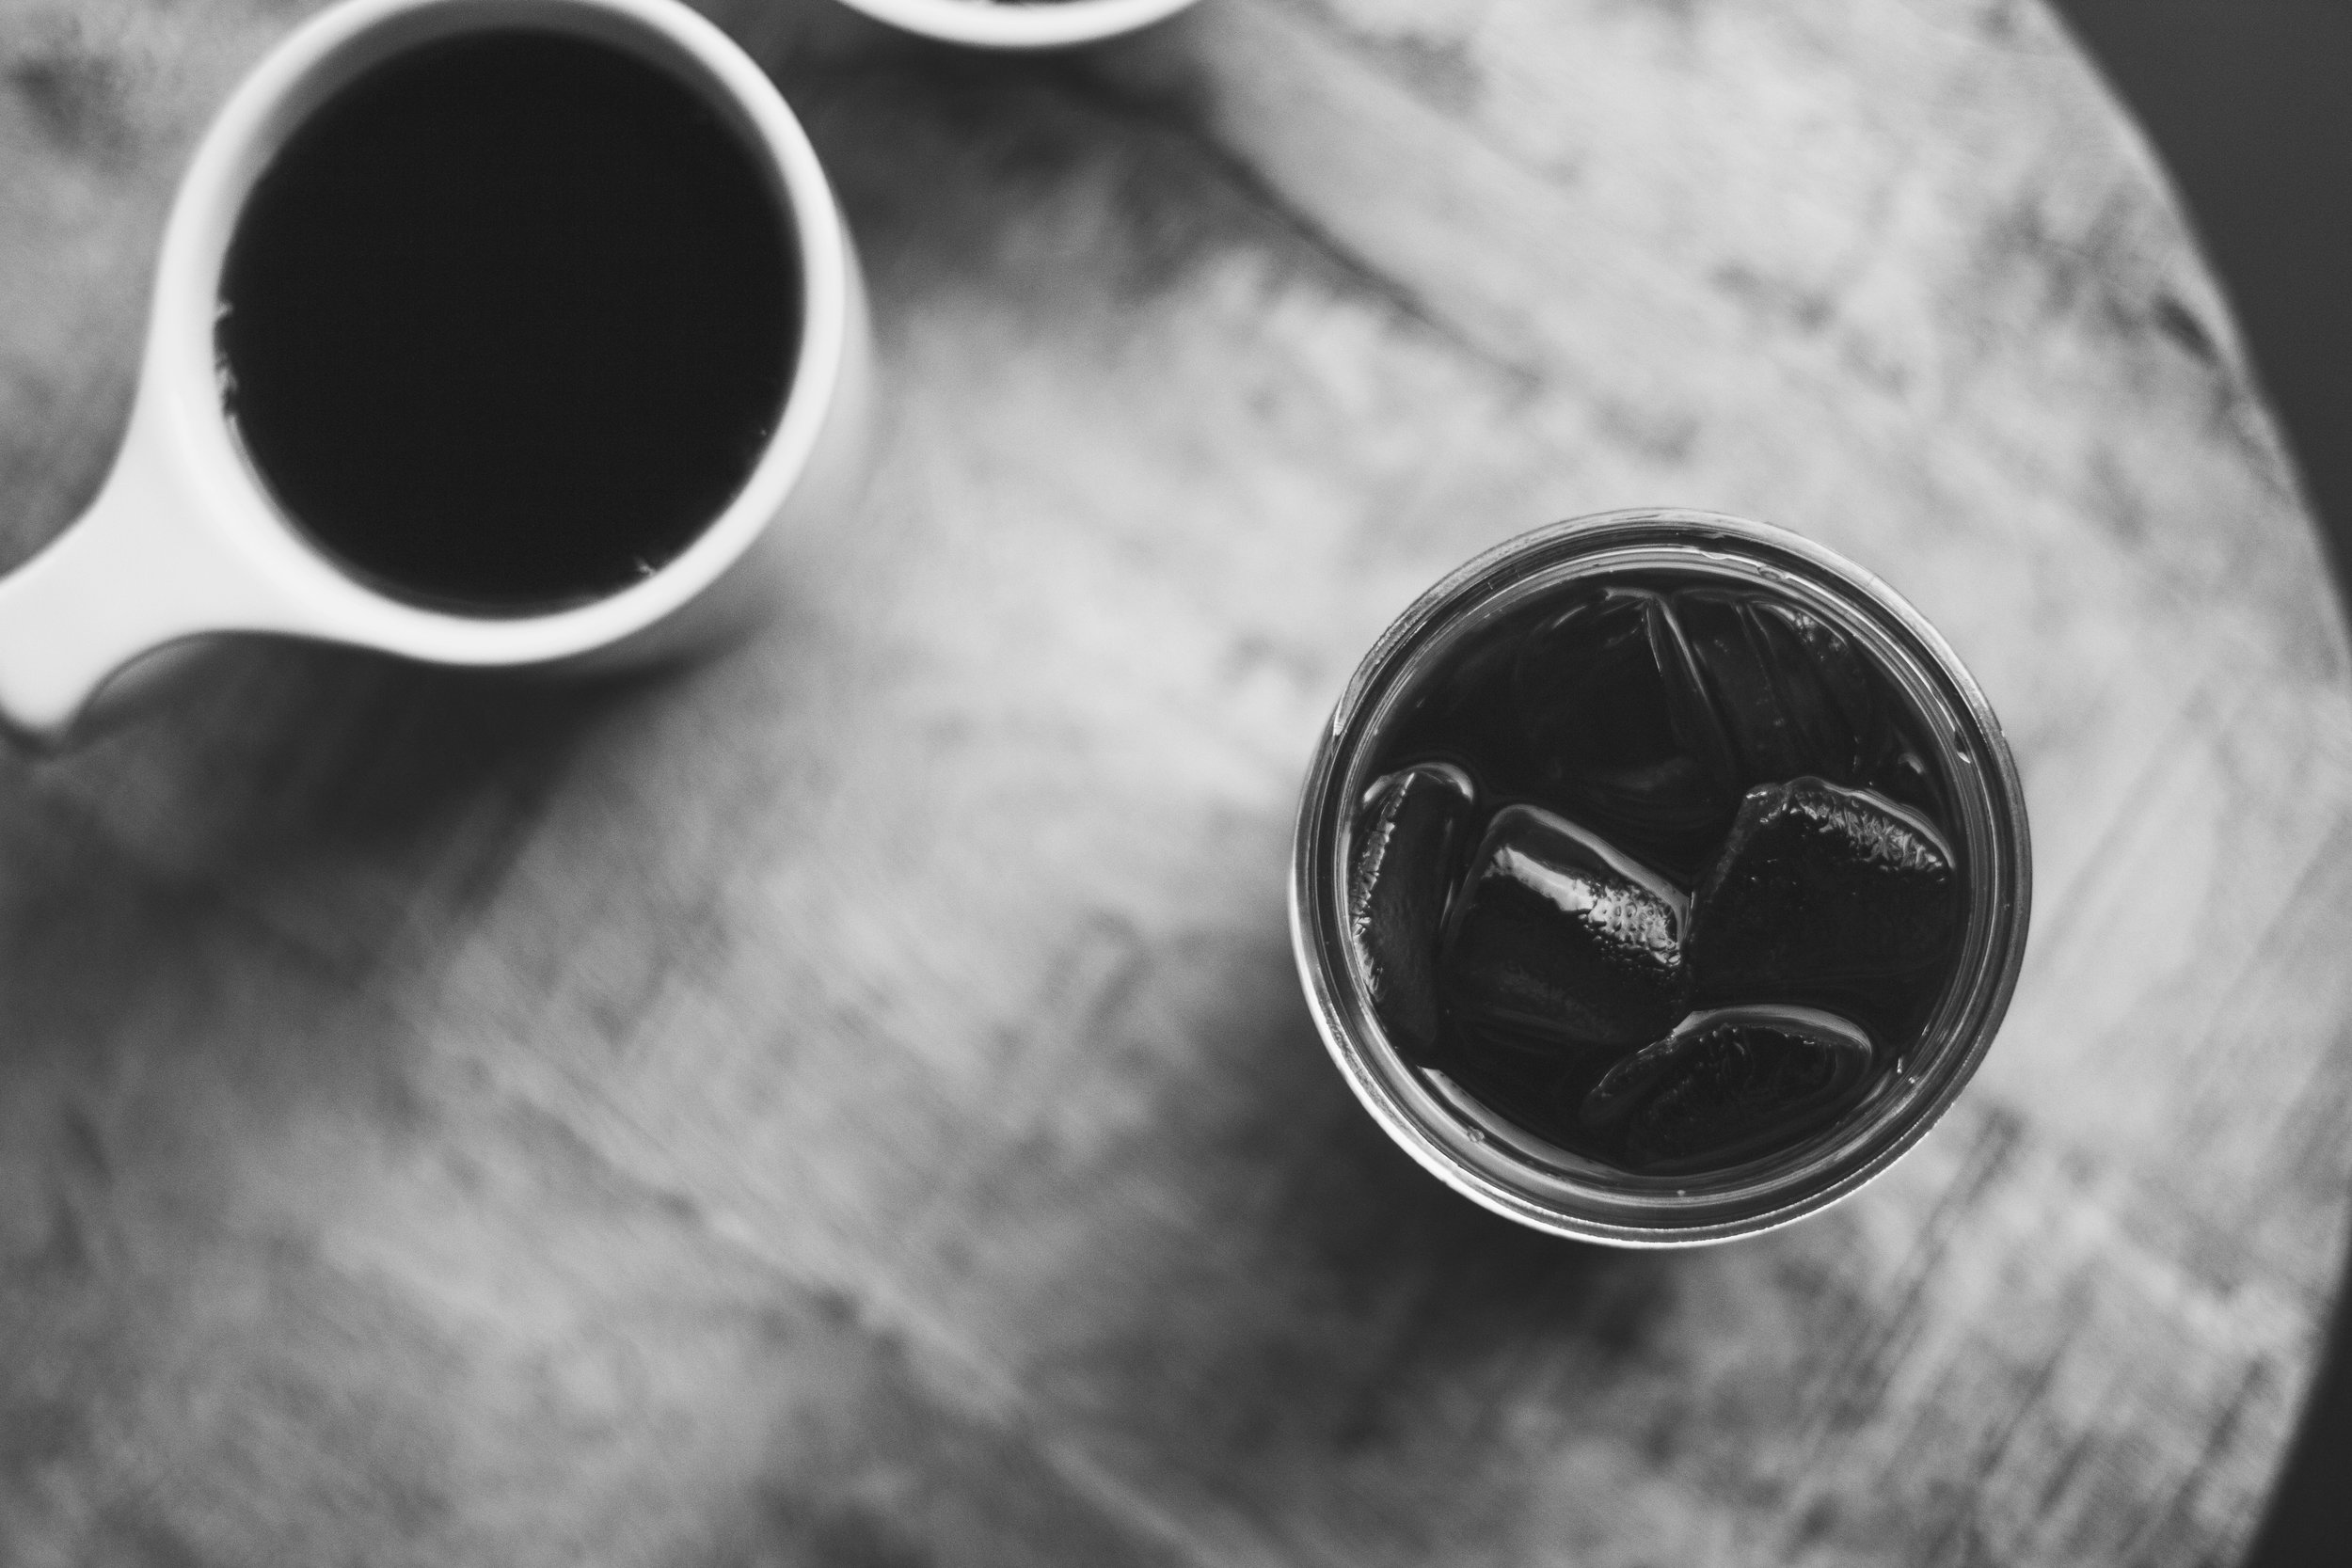 A mug of black coffee and a glass of cold brew, seen from above